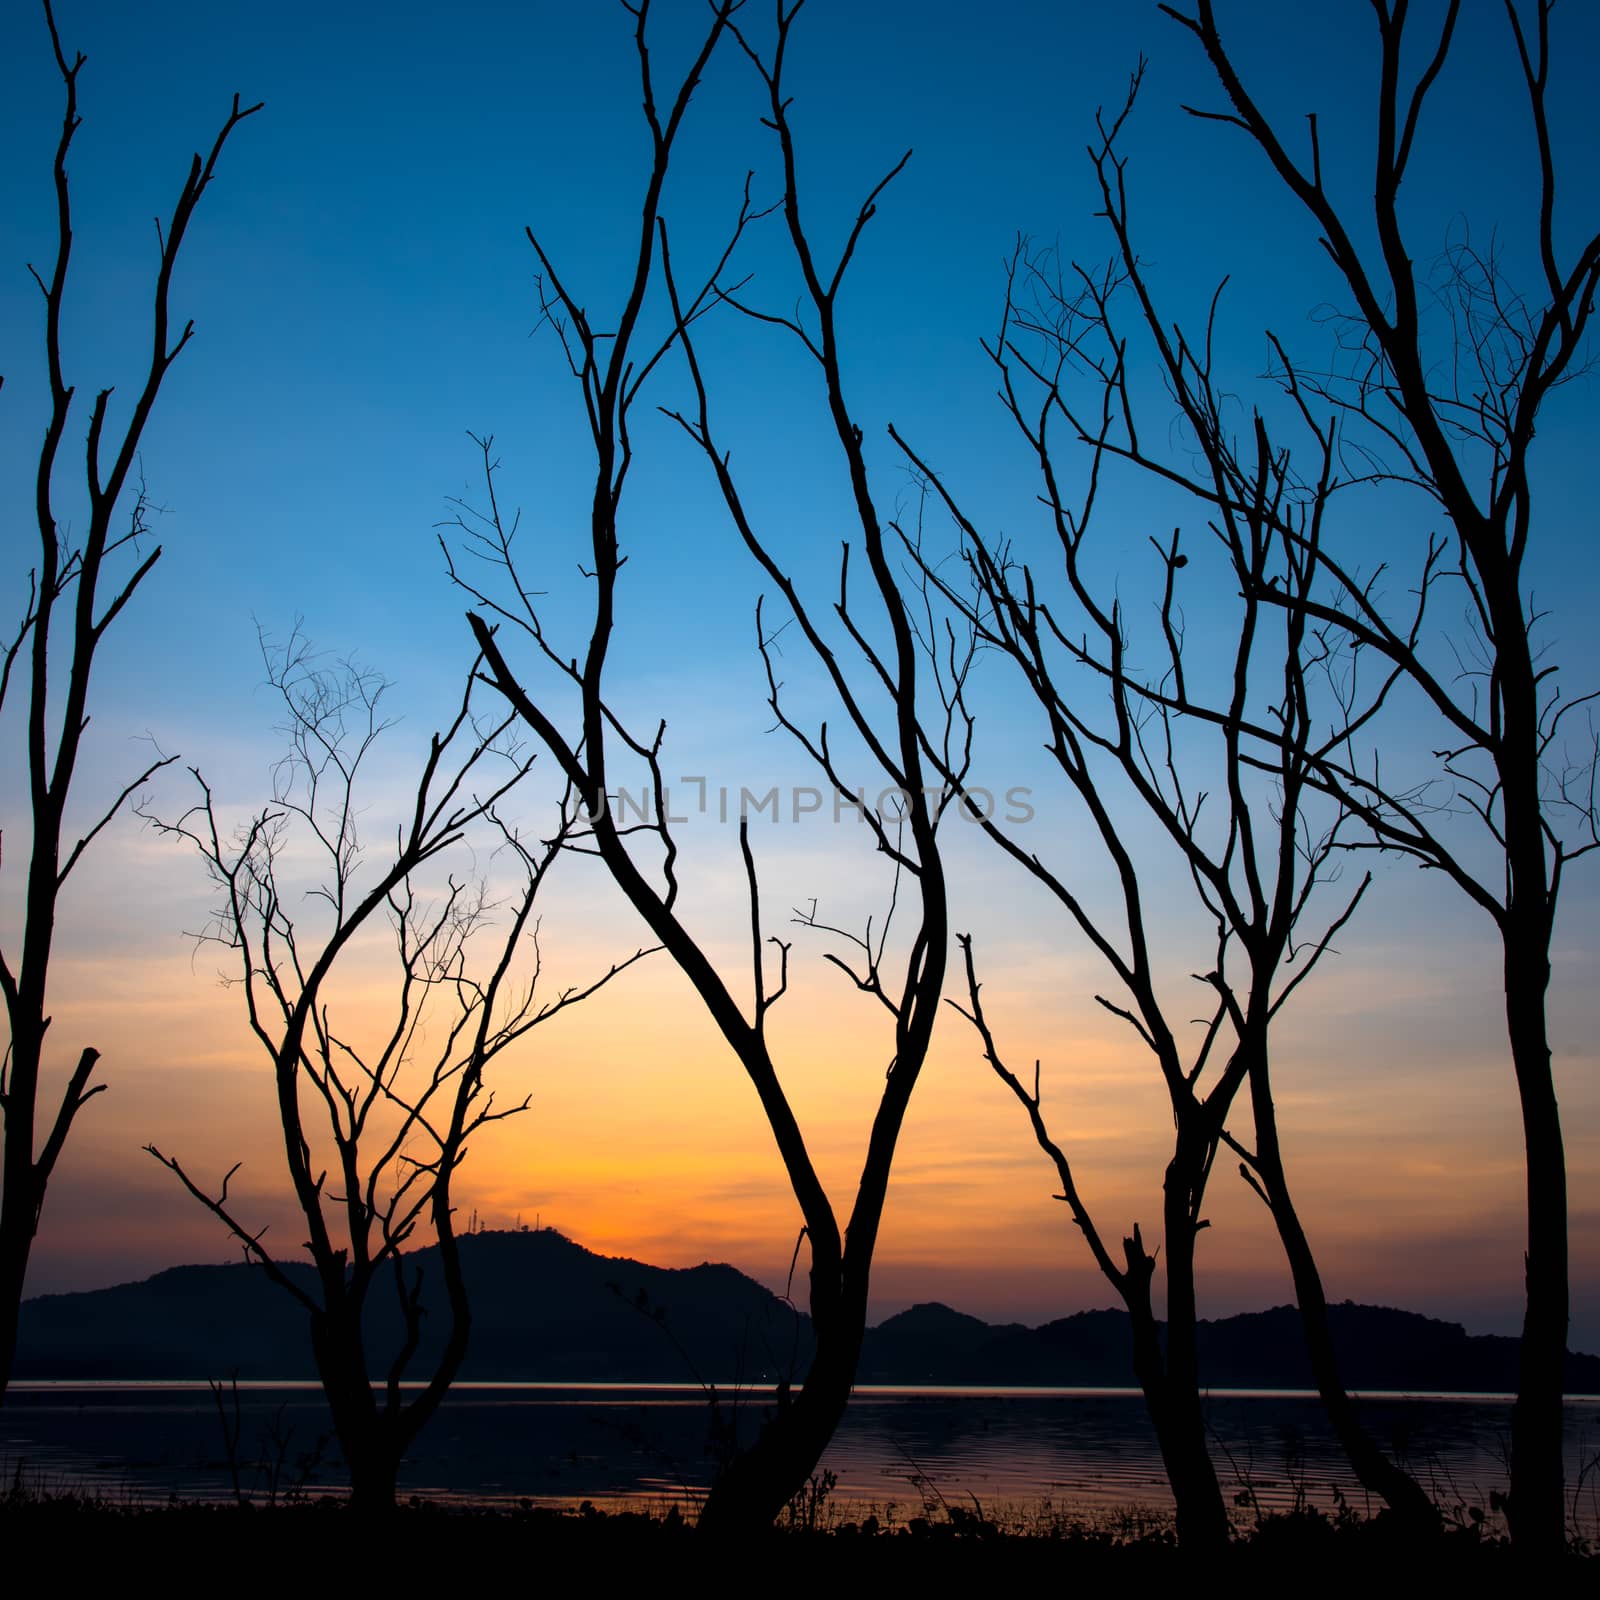 Dried tree beside lake and mountain with sunset sky by pixbox77